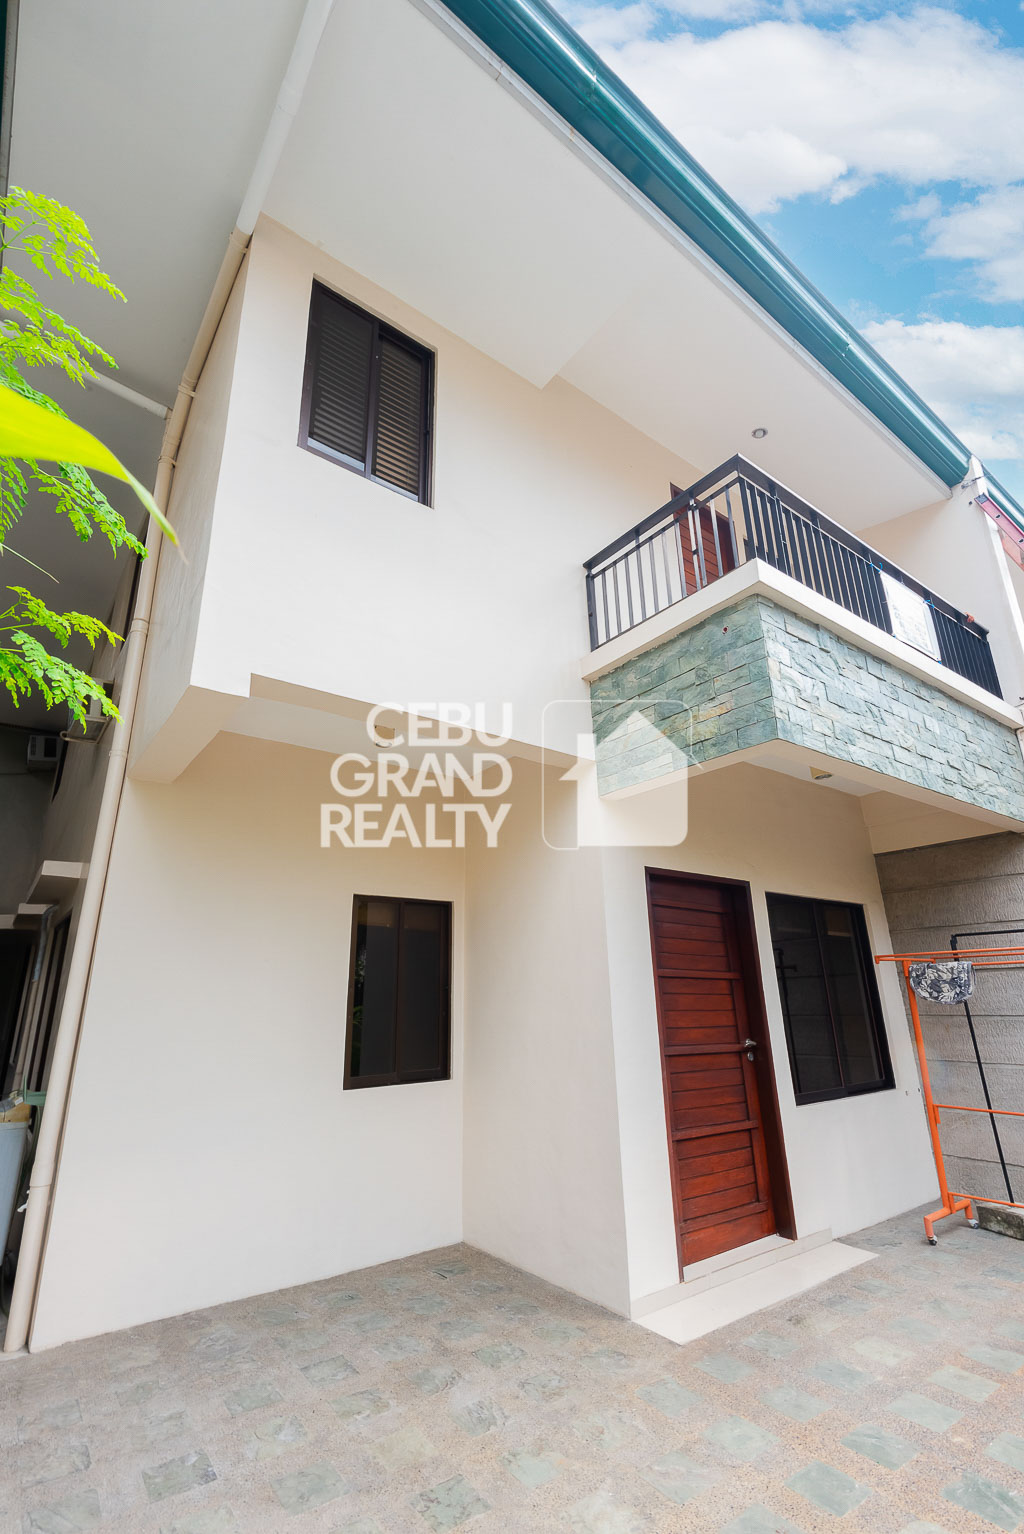 RHCV2 Furnished 3 Bedroom House for Rent in Mabolo - Cebu Grand Realty (15)